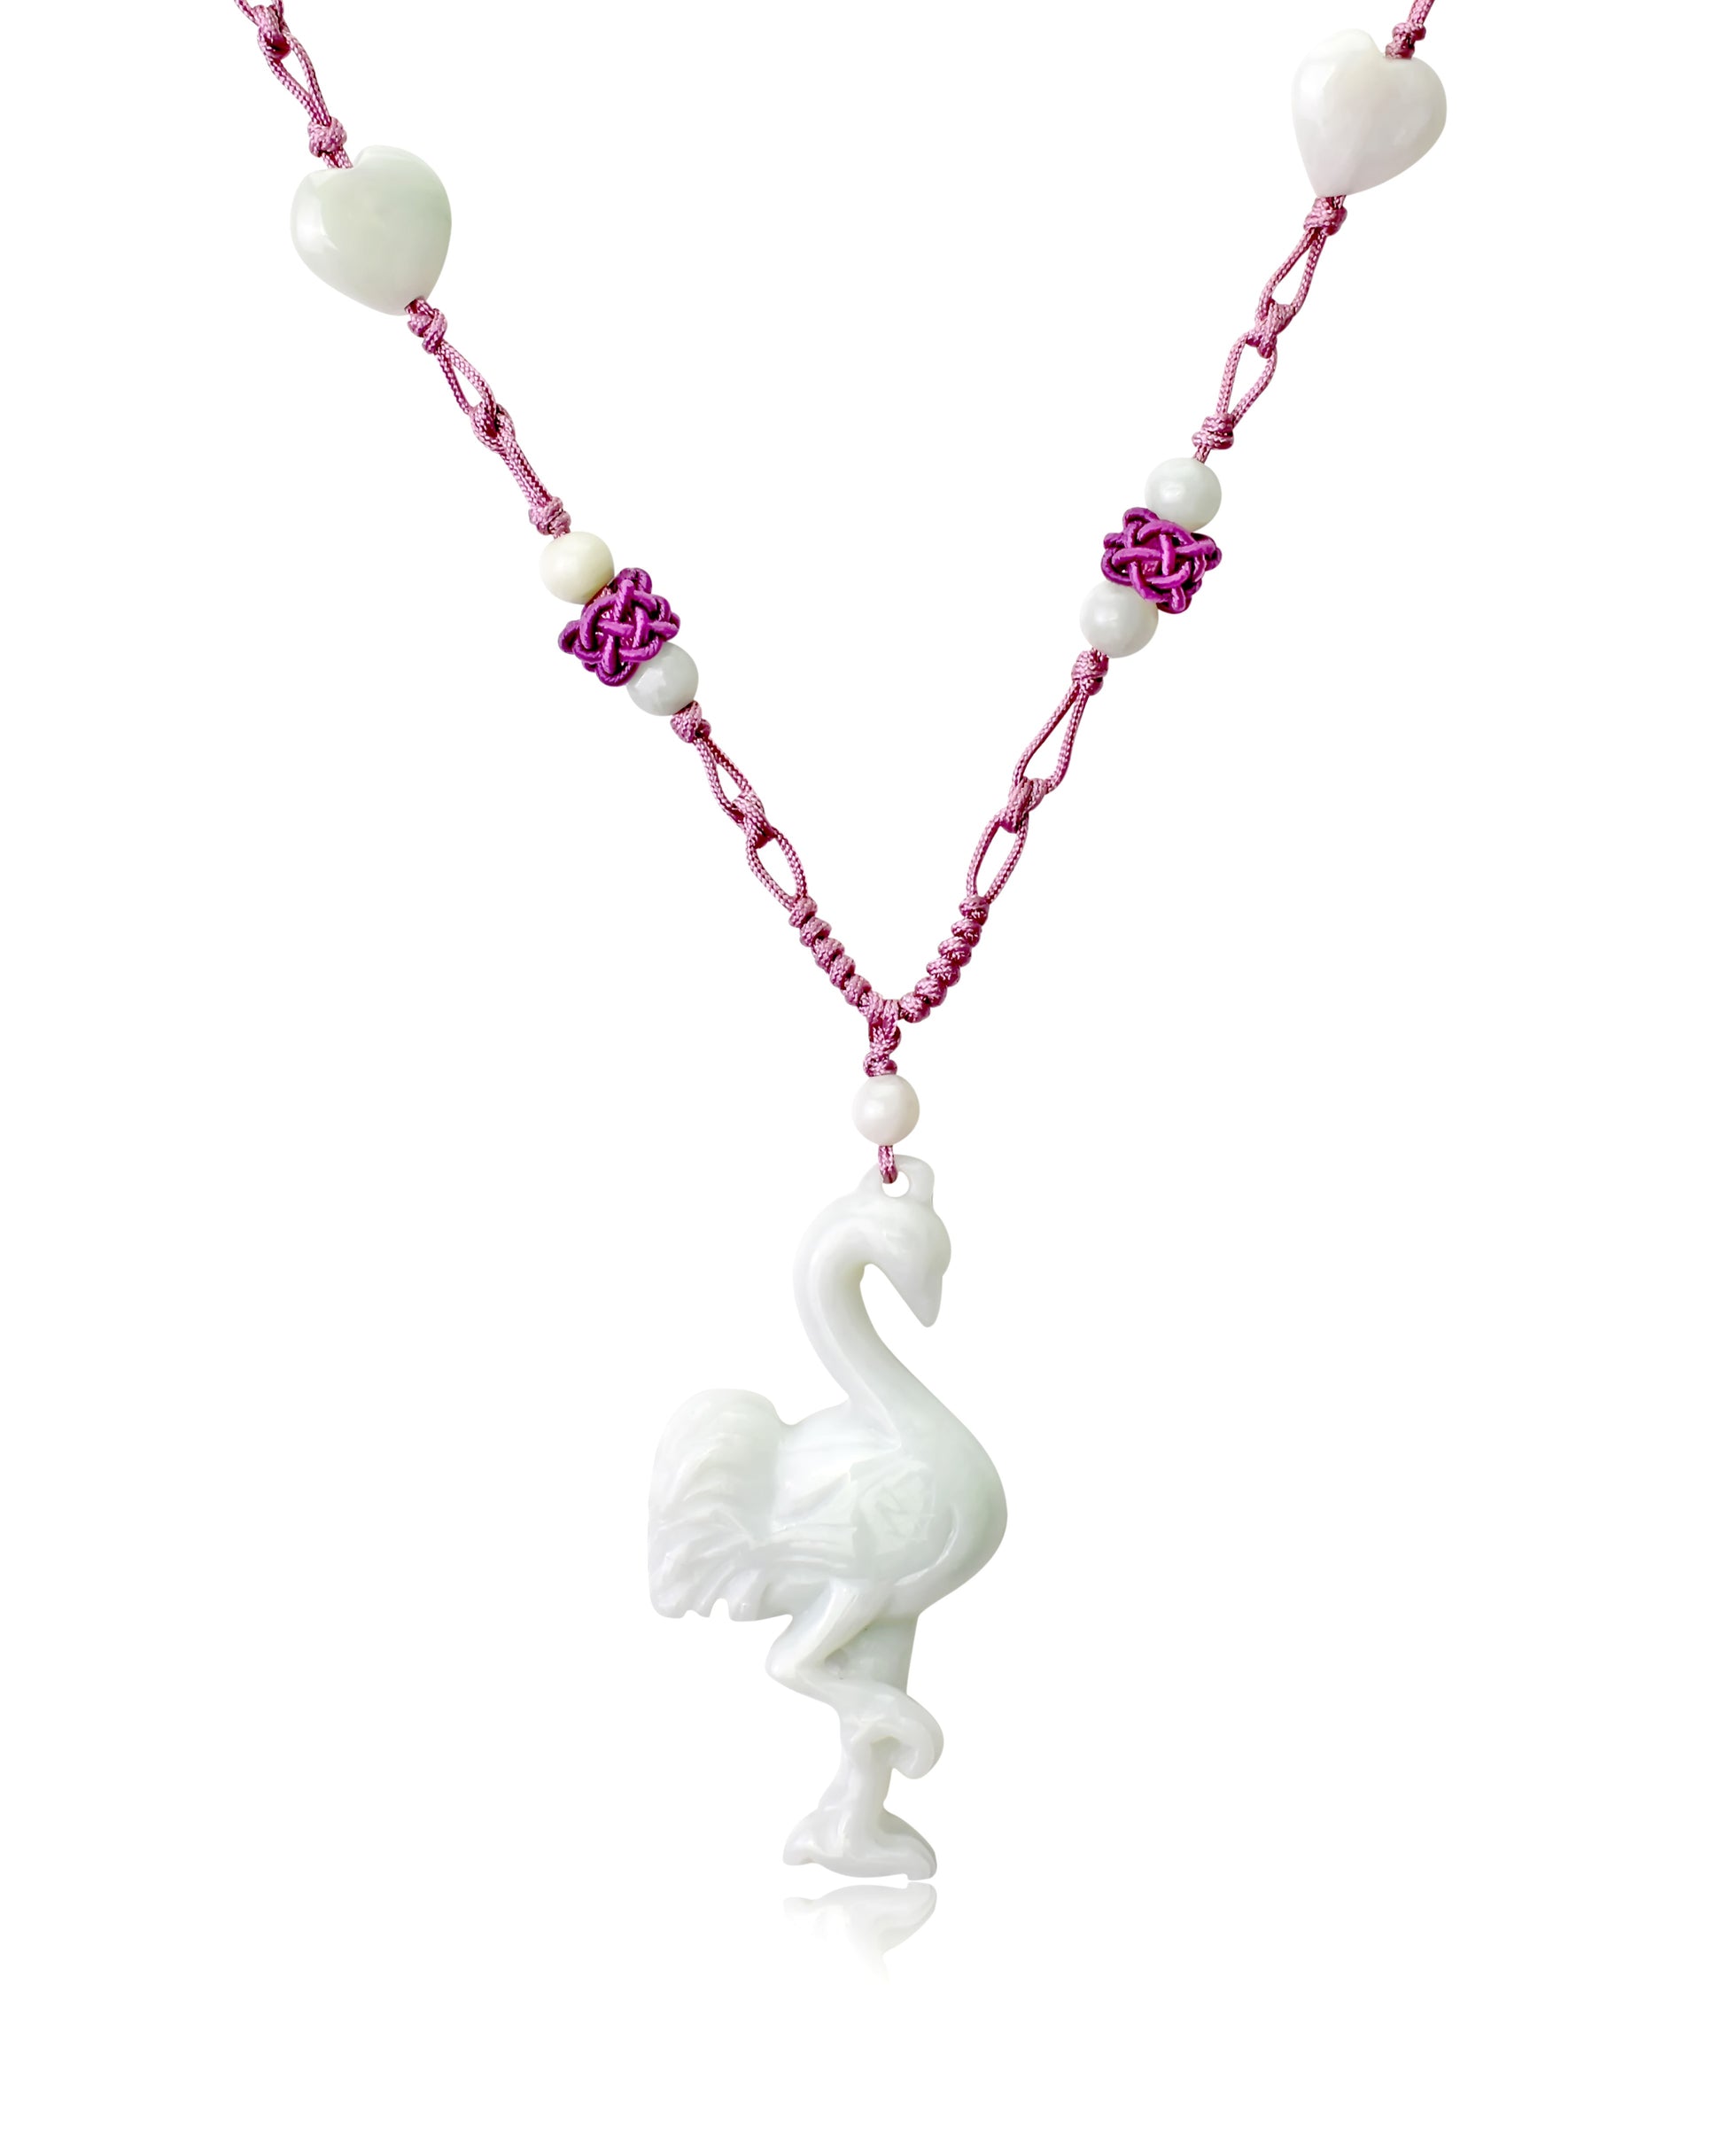 Add a Tropical Flair to Your Wardrobe with the Flamingo Jade Necklace made with Lavender Cord